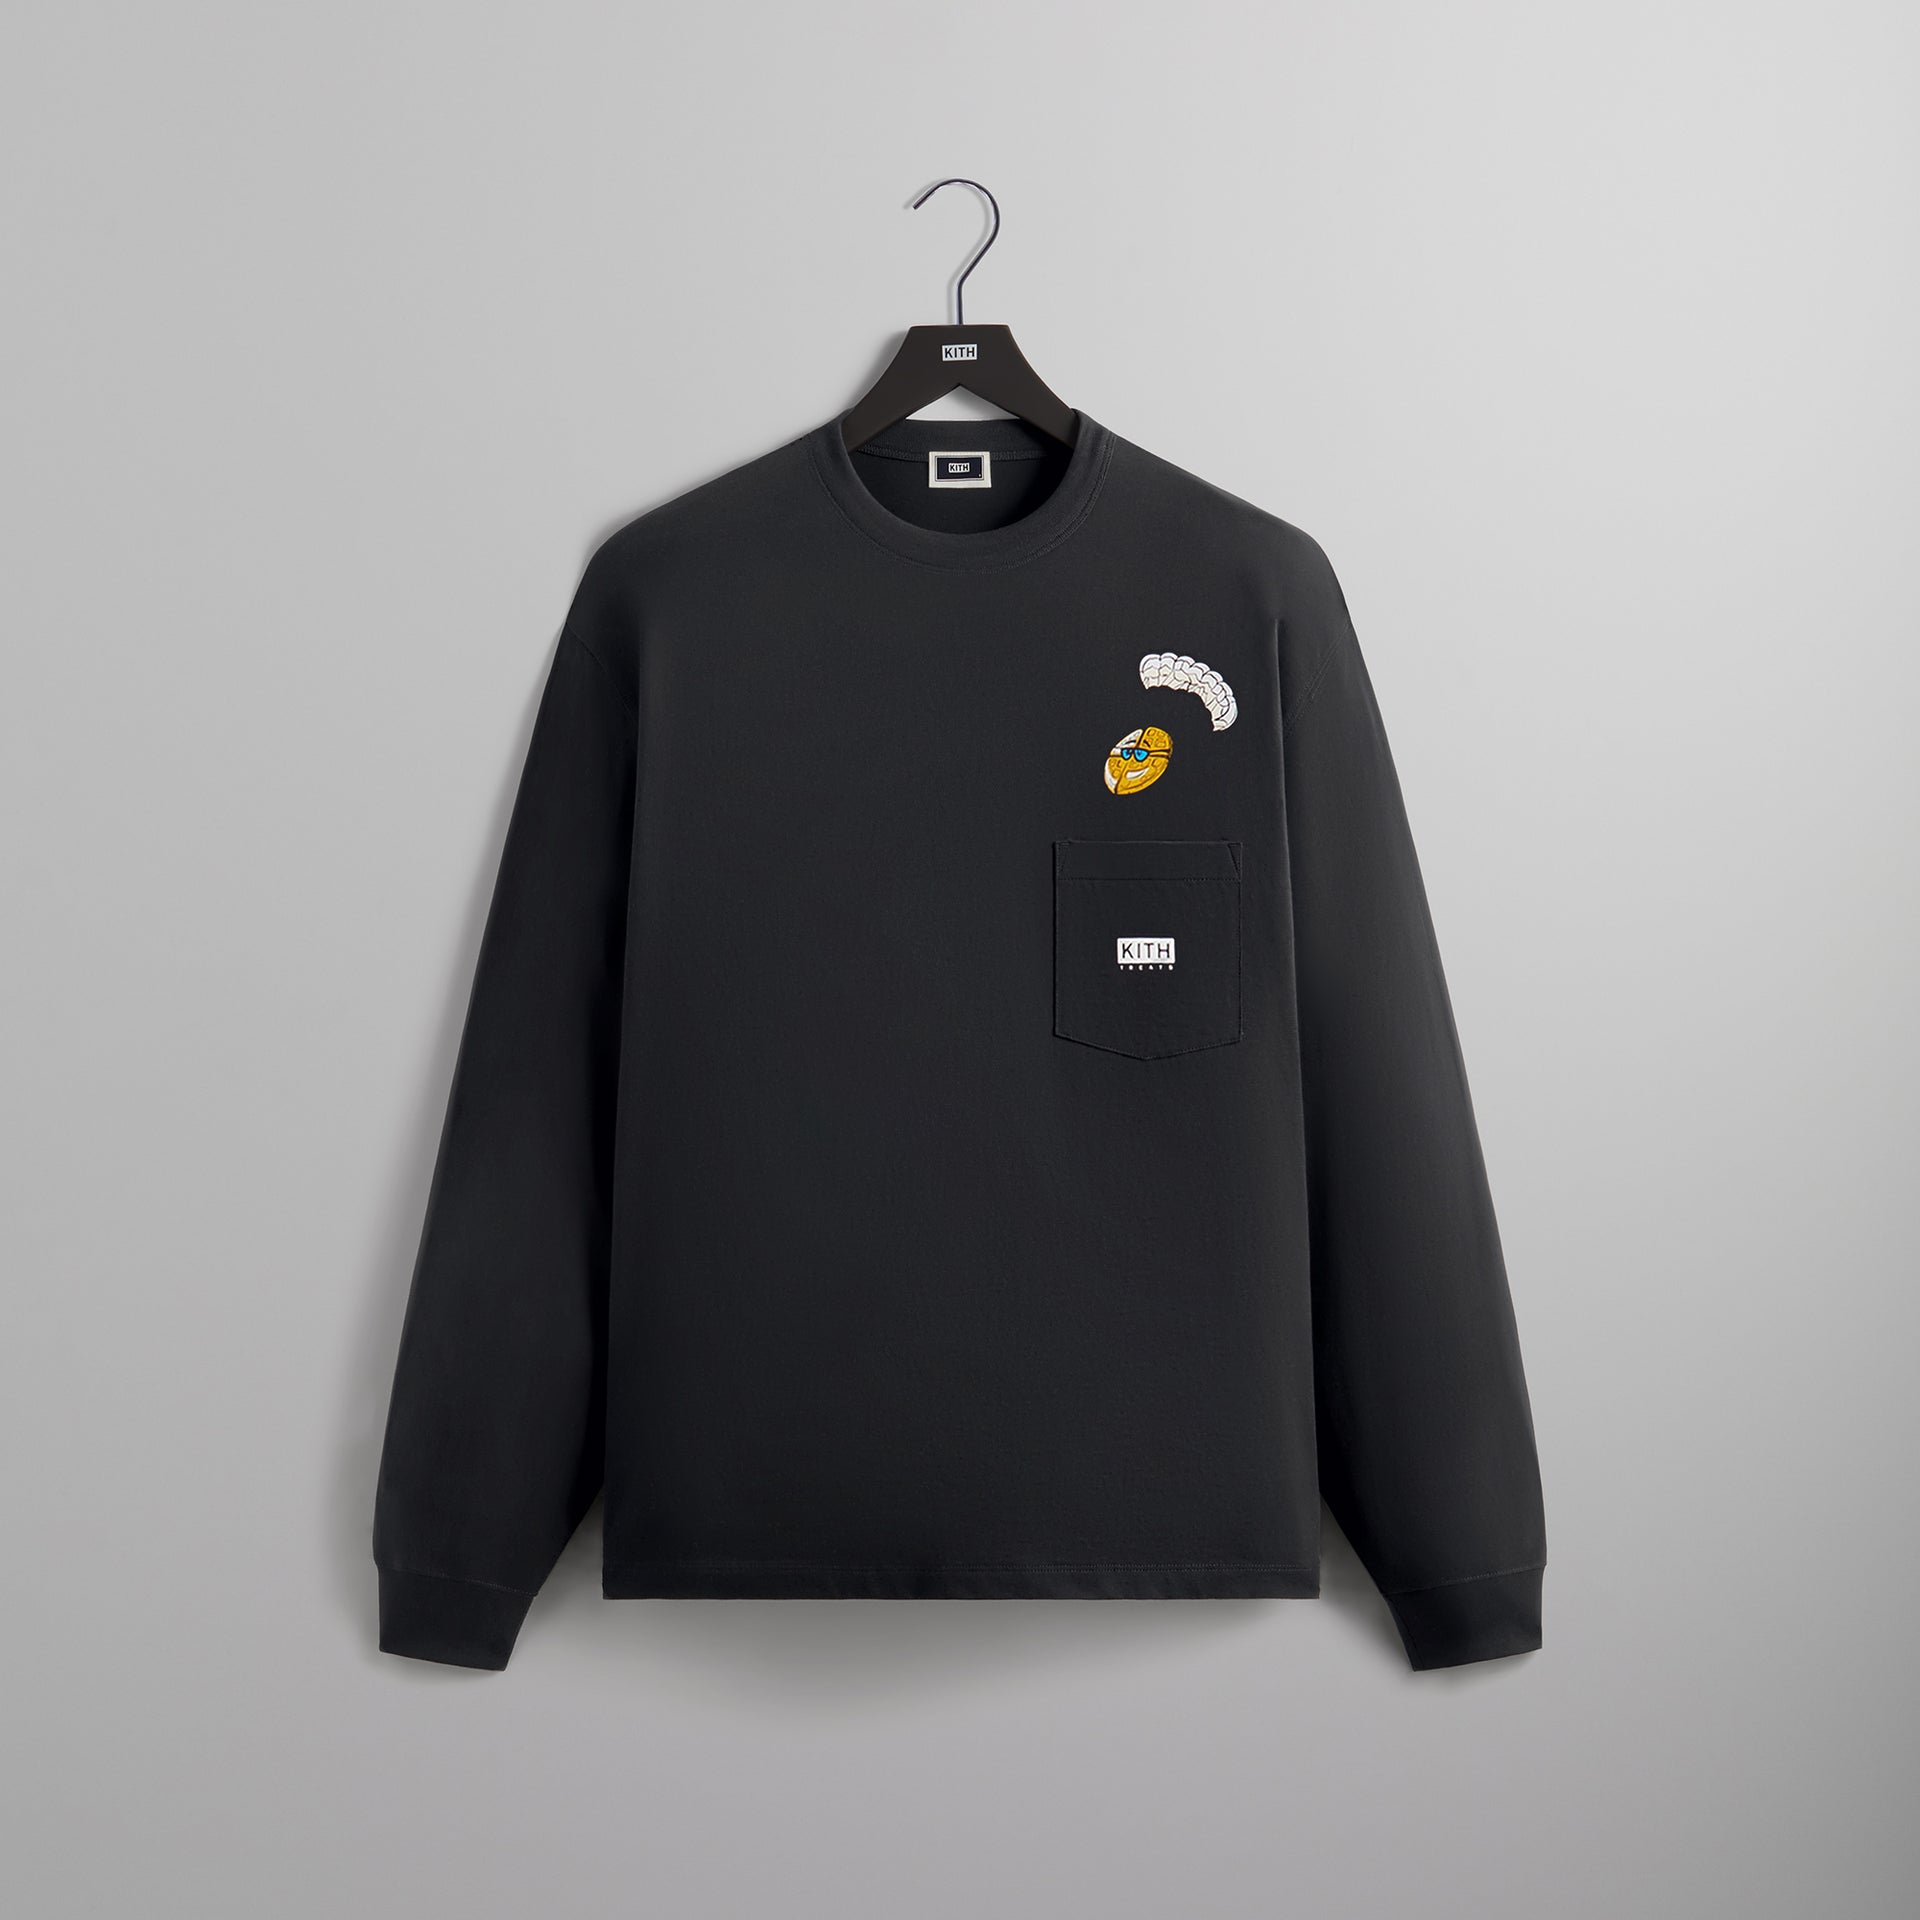 Erlebniswelt-fliegenfischenShops Please note, that you are being redirected to Europe Long Sleeve Pocket Tee - Black